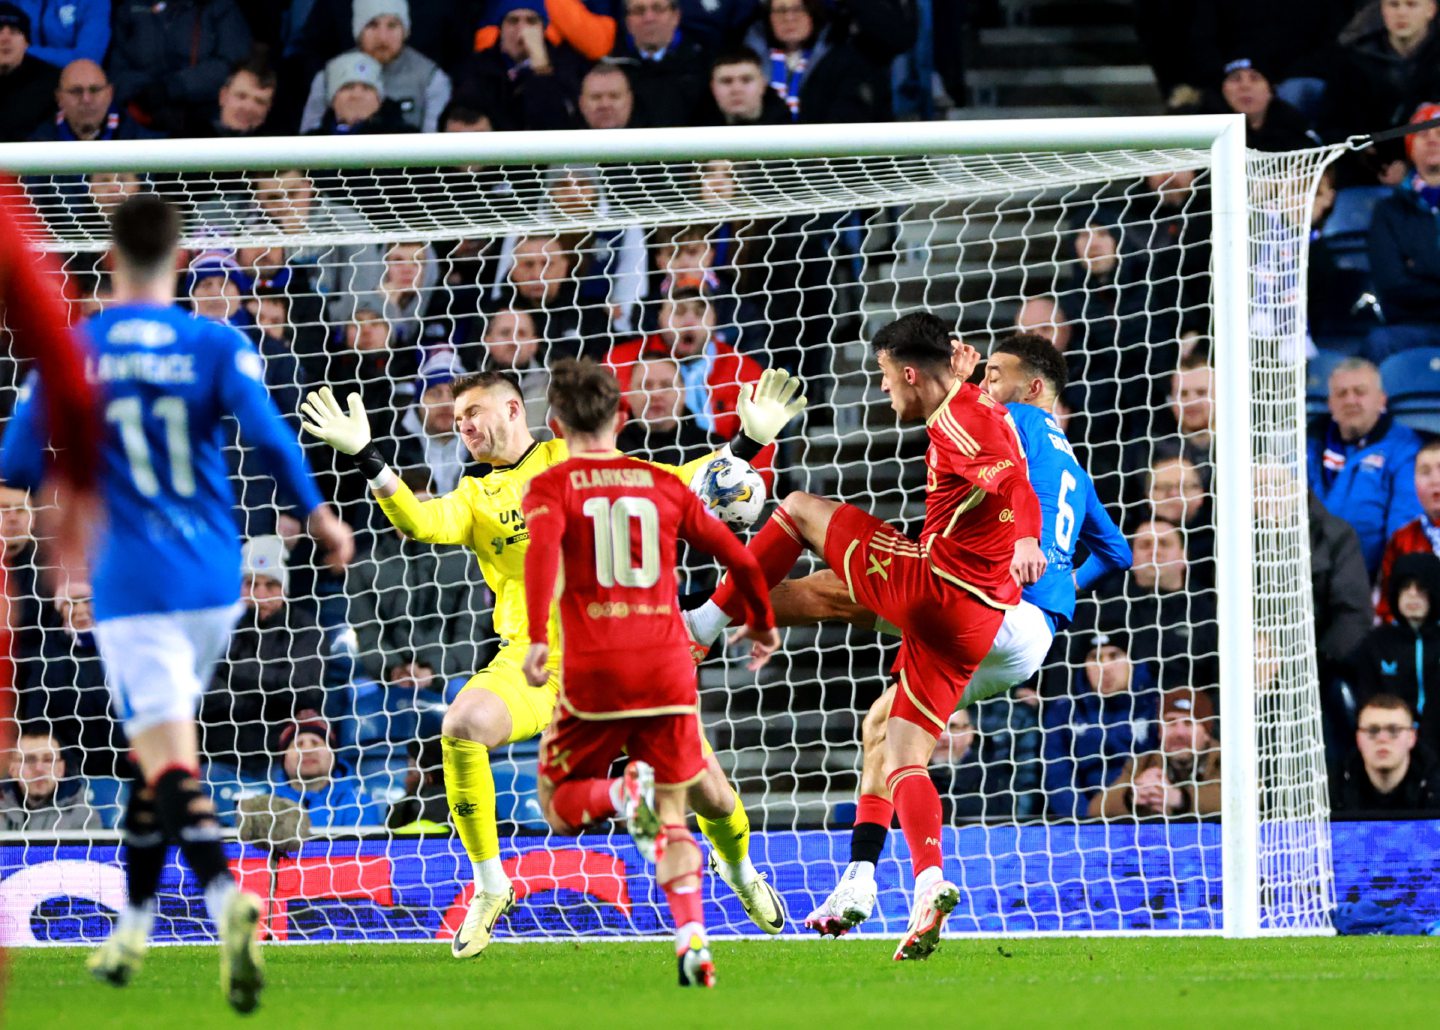 Aberdeen's Bojan Miovski scores their side's first goal of the 2-1 loss to Rangers at Ibrox. Image: SNS 